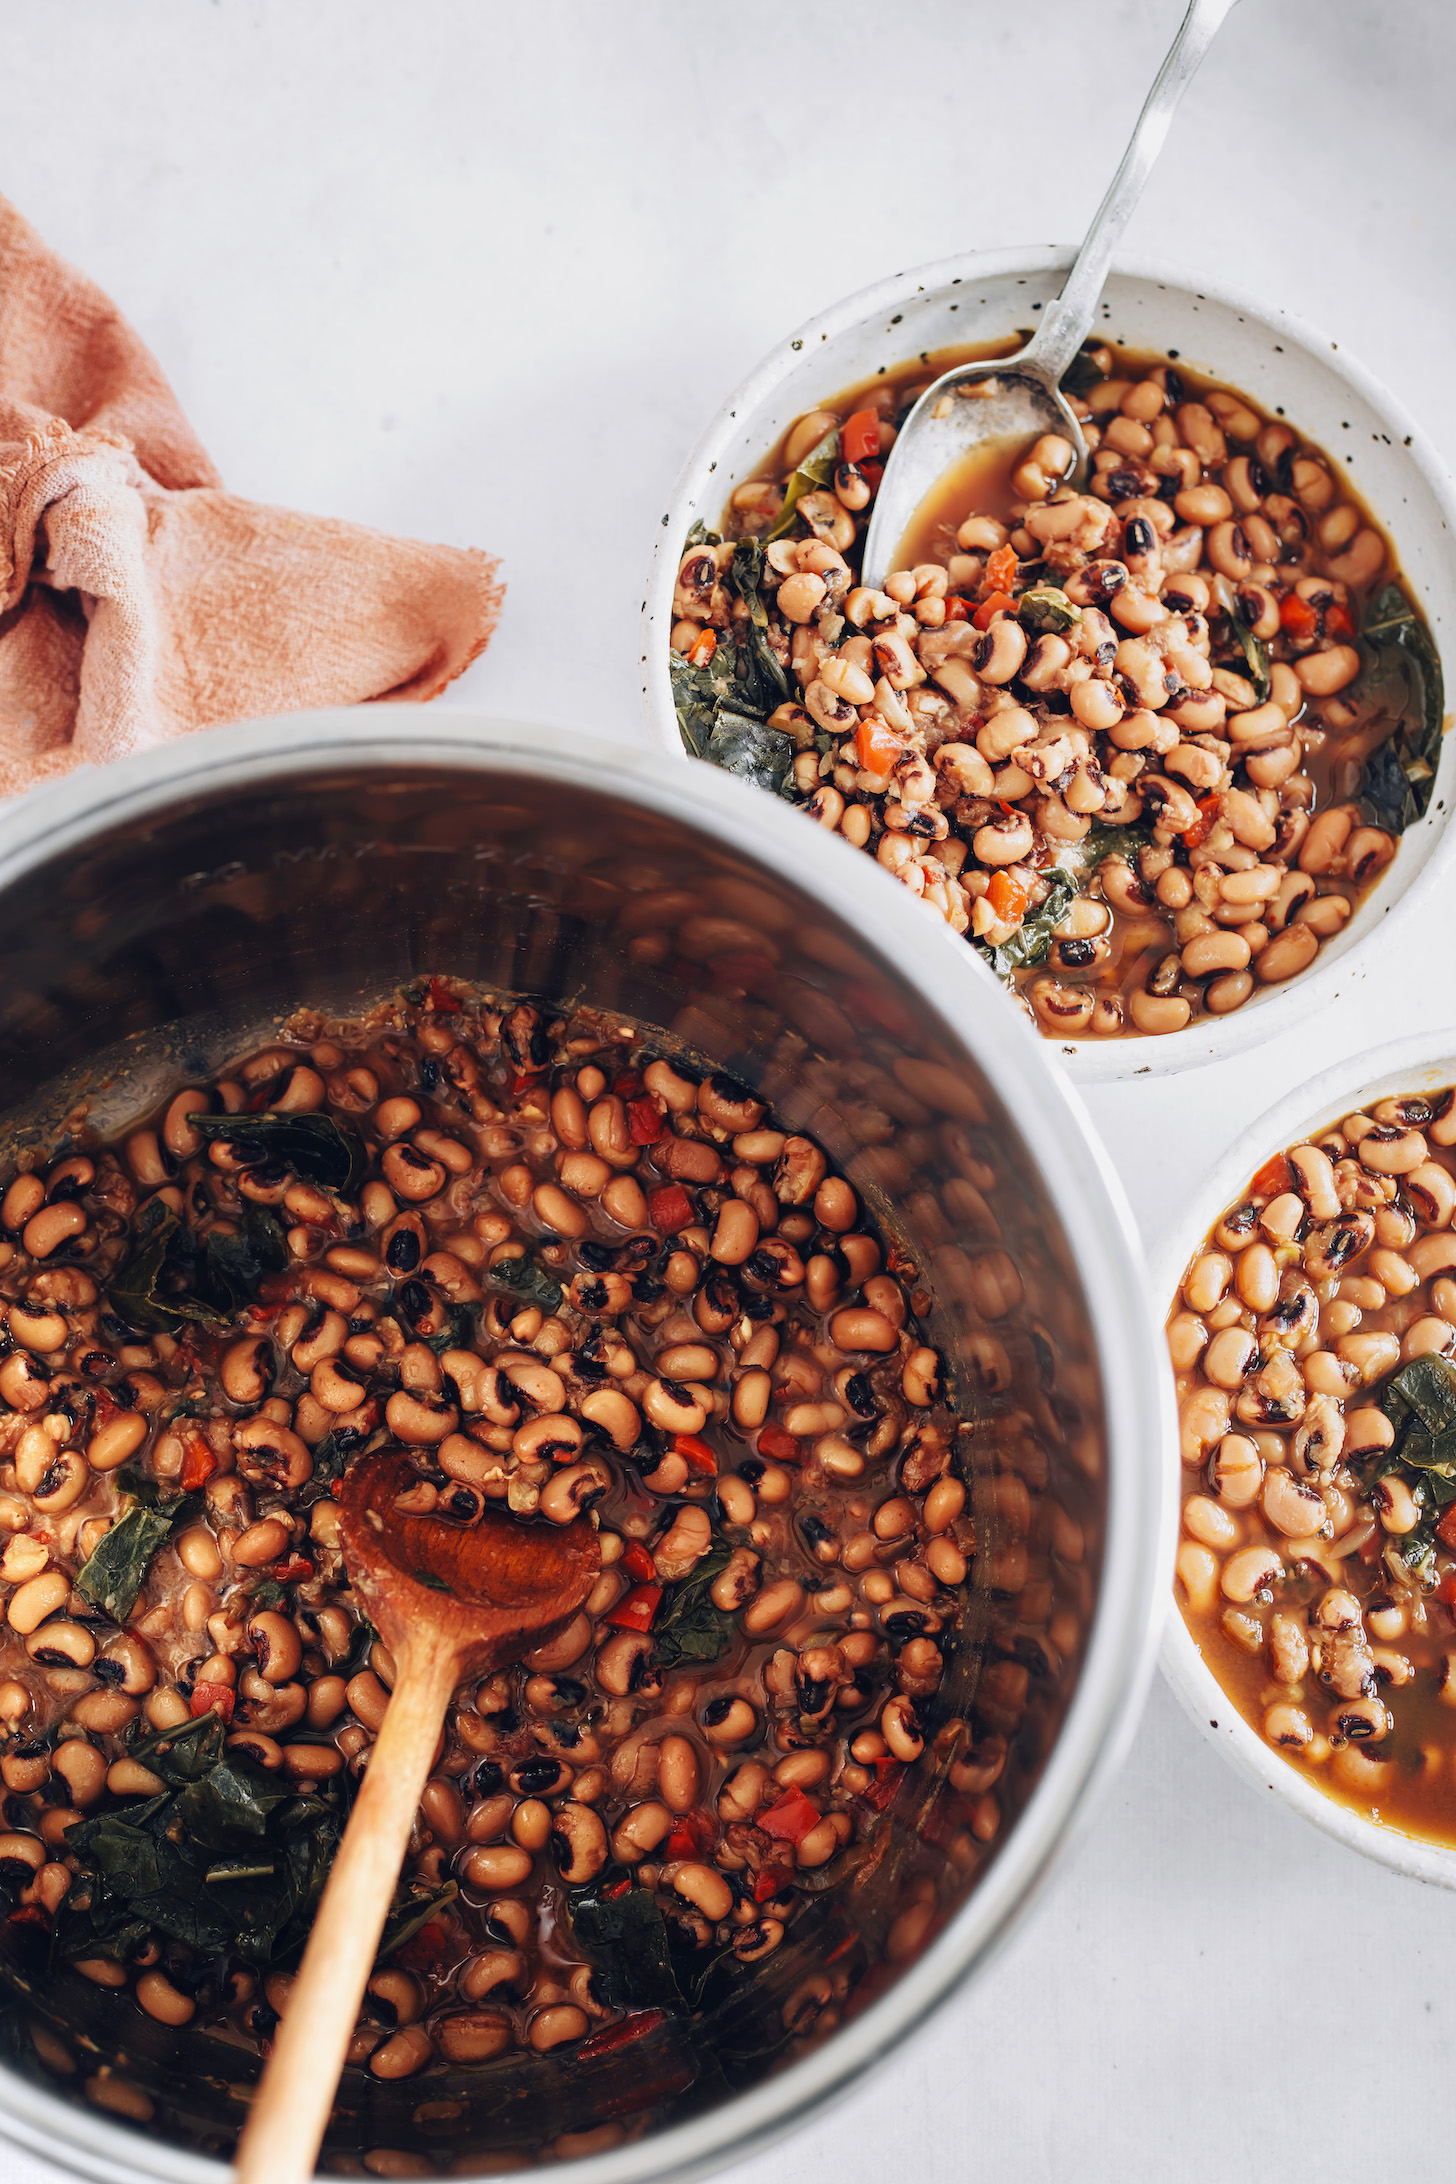 Instant Pot and bowls of vegan black eyed peas and greens